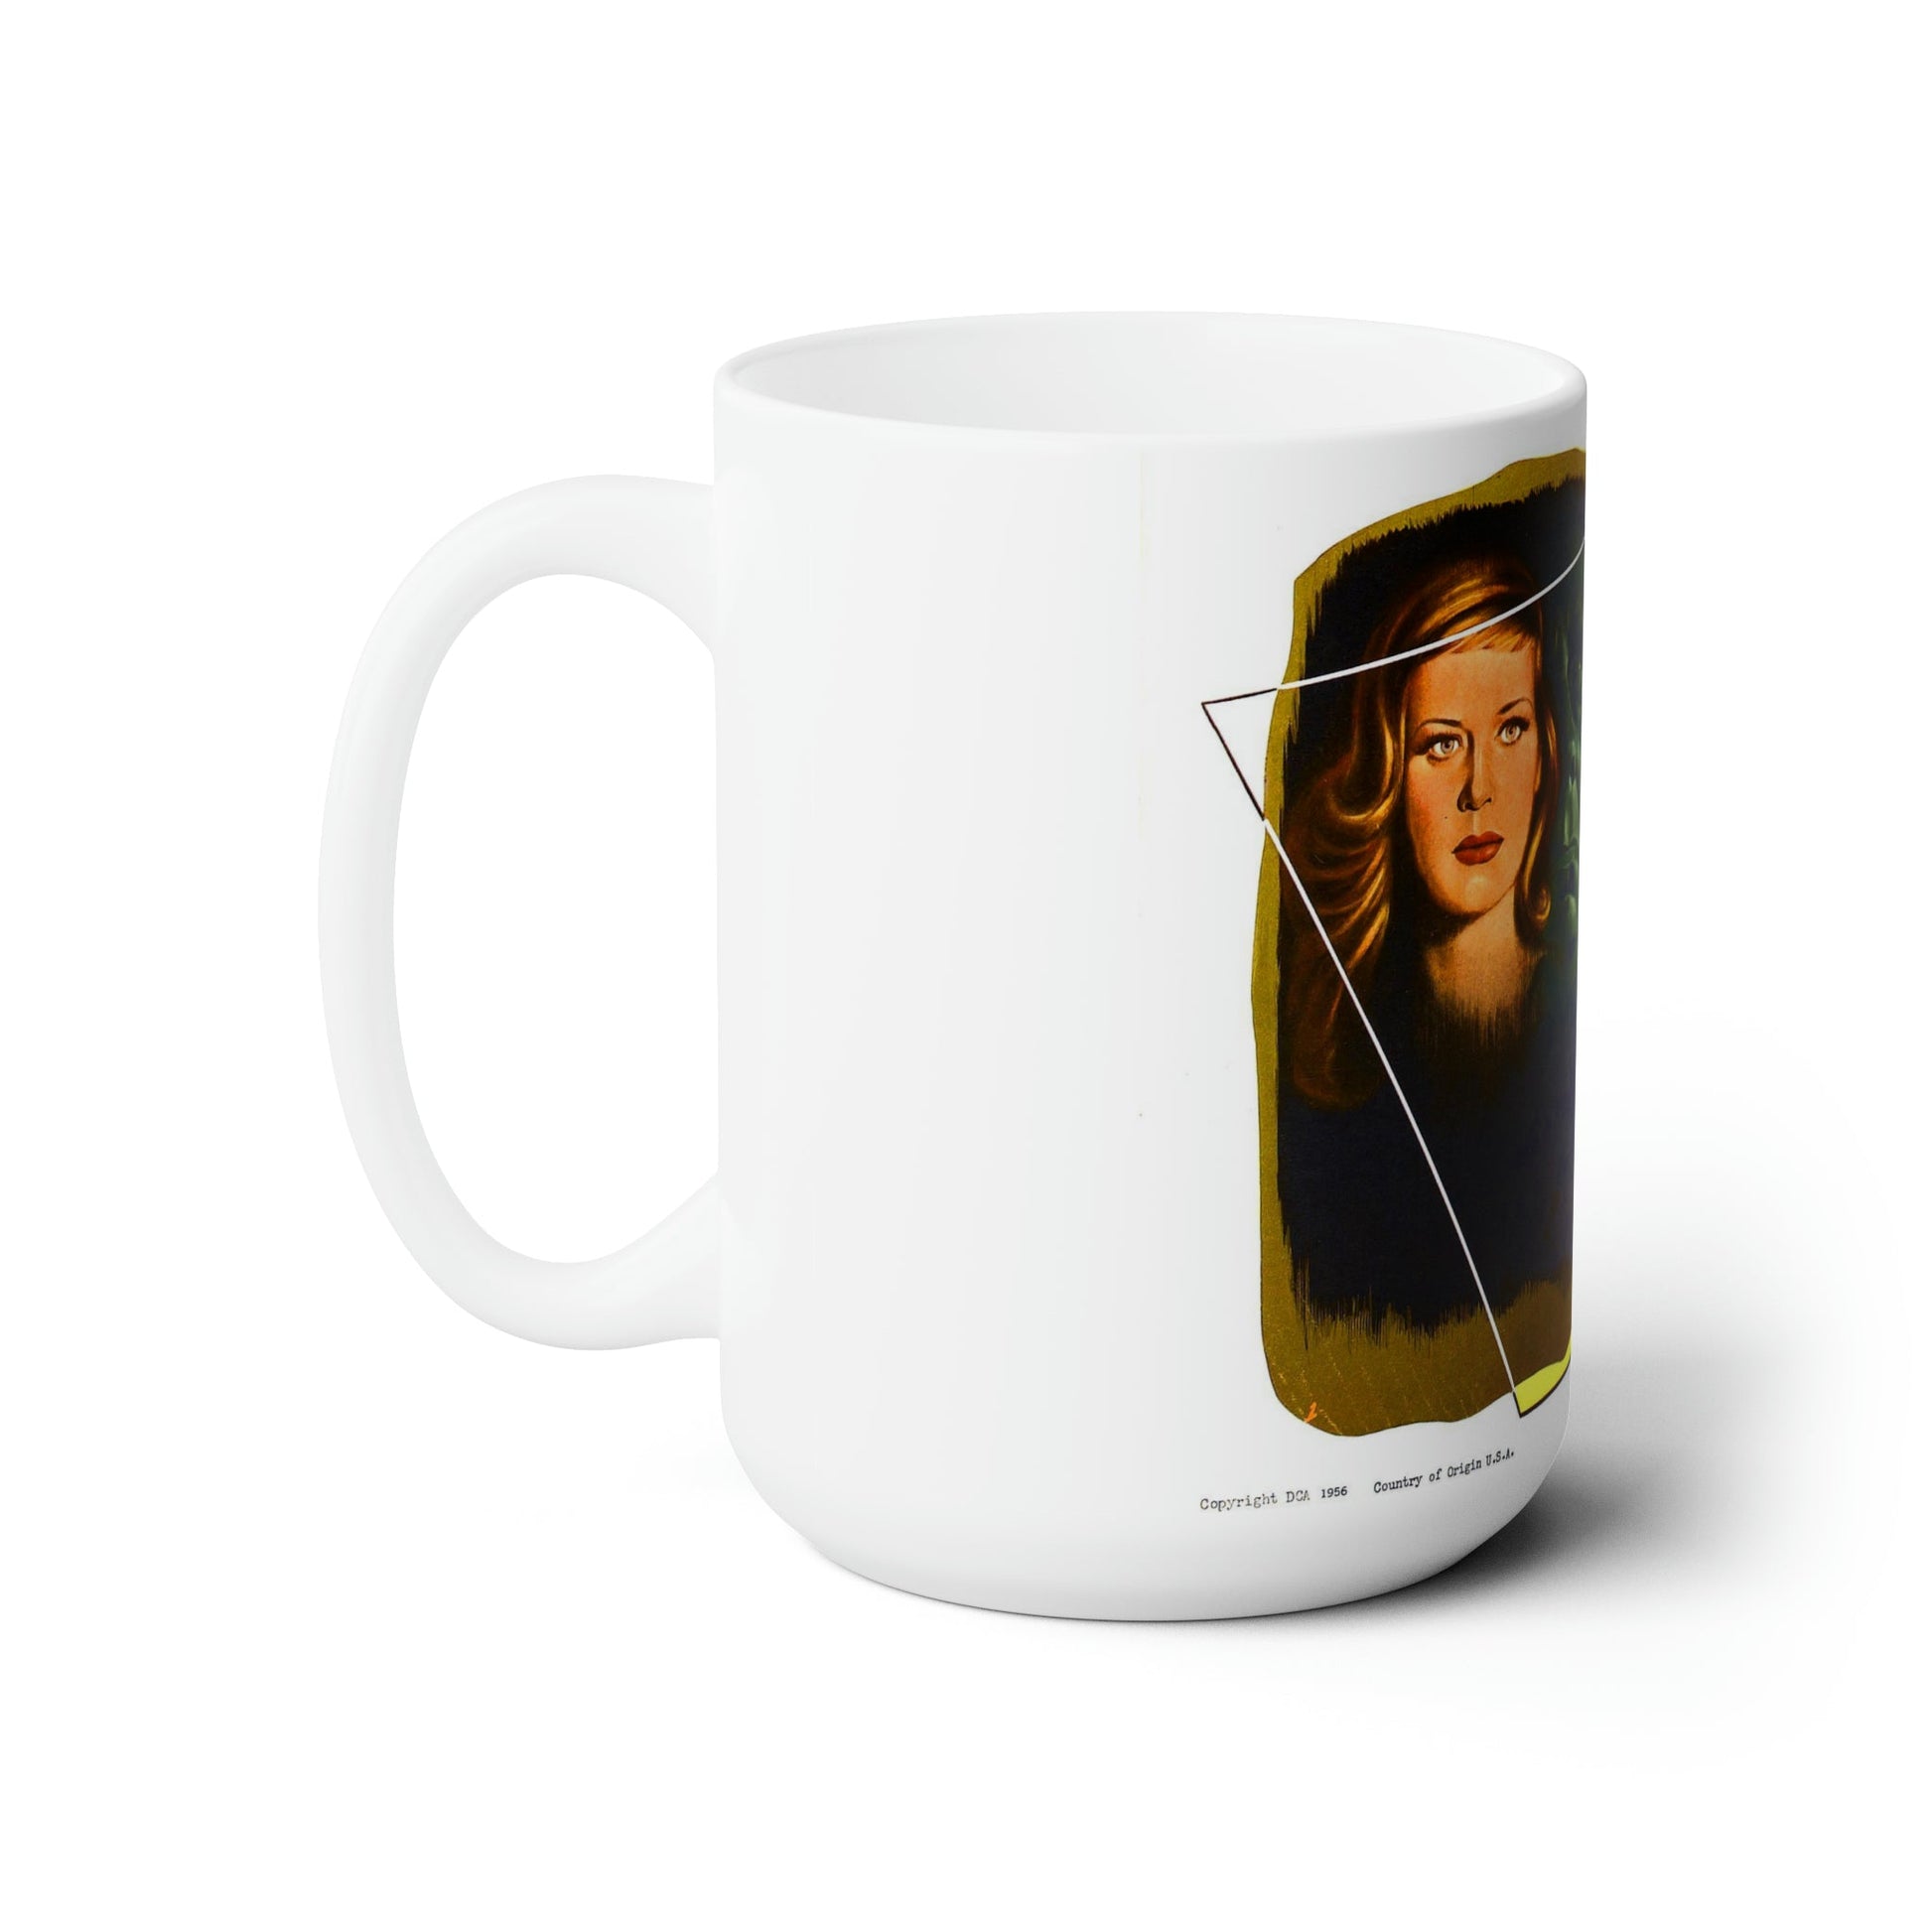 UNNATURAL (ALRAUNE) 3 1952 Movie Poster - White Coffee Cup 15oz-15oz-The Sticker Space